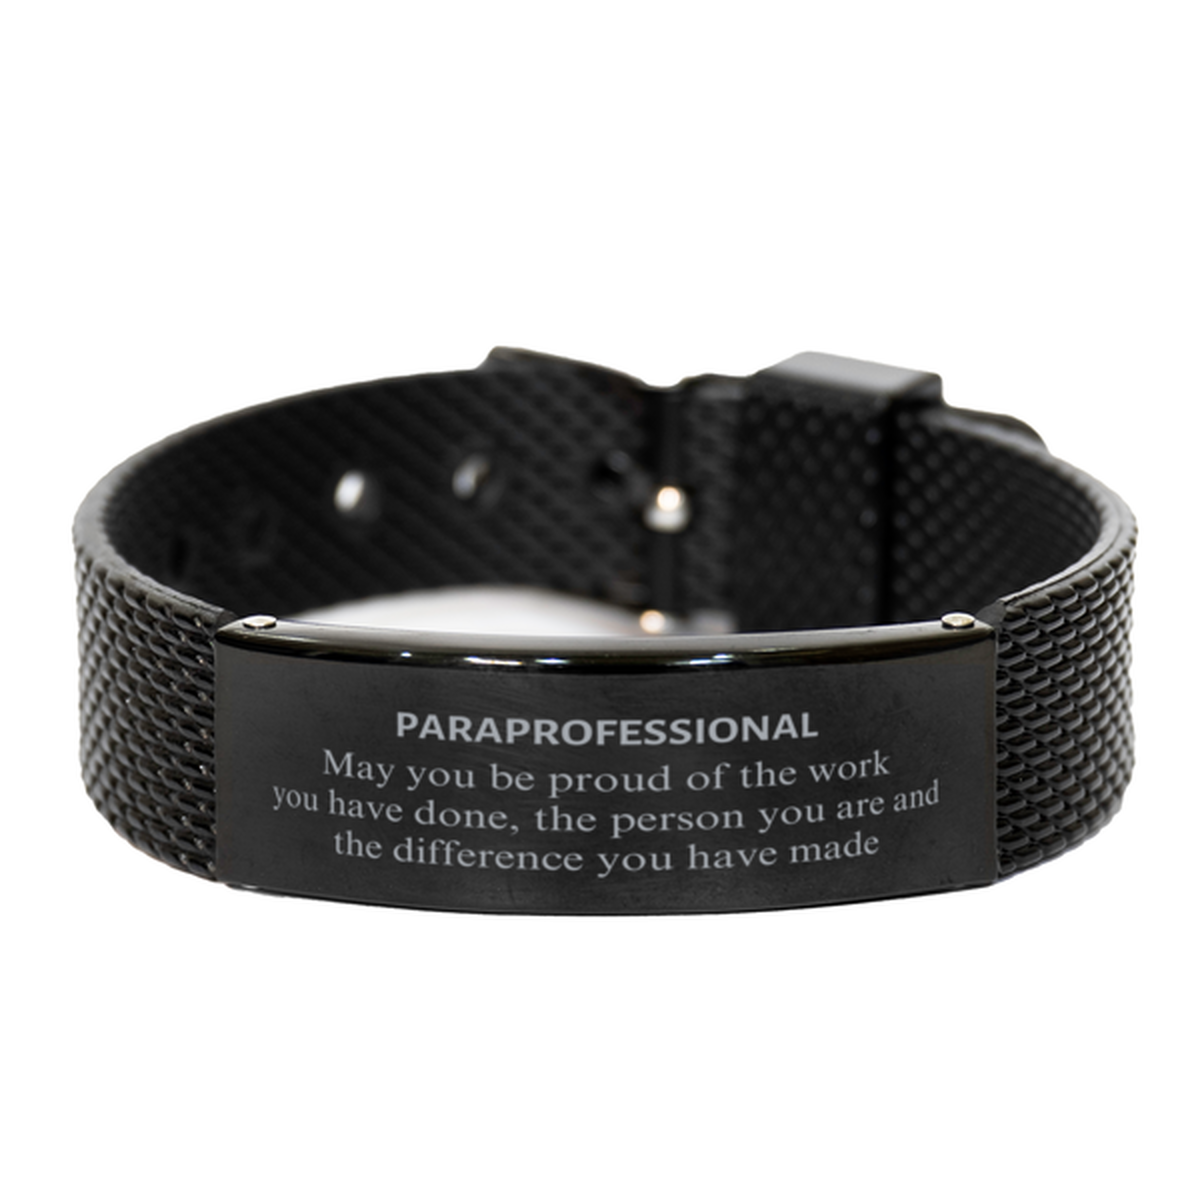 Paraprofessional May you be proud of the work you have done, Retirement Paraprofessional Black Shark Mesh Bracelet for Colleague Appreciation Gifts Amazing for Paraprofessional